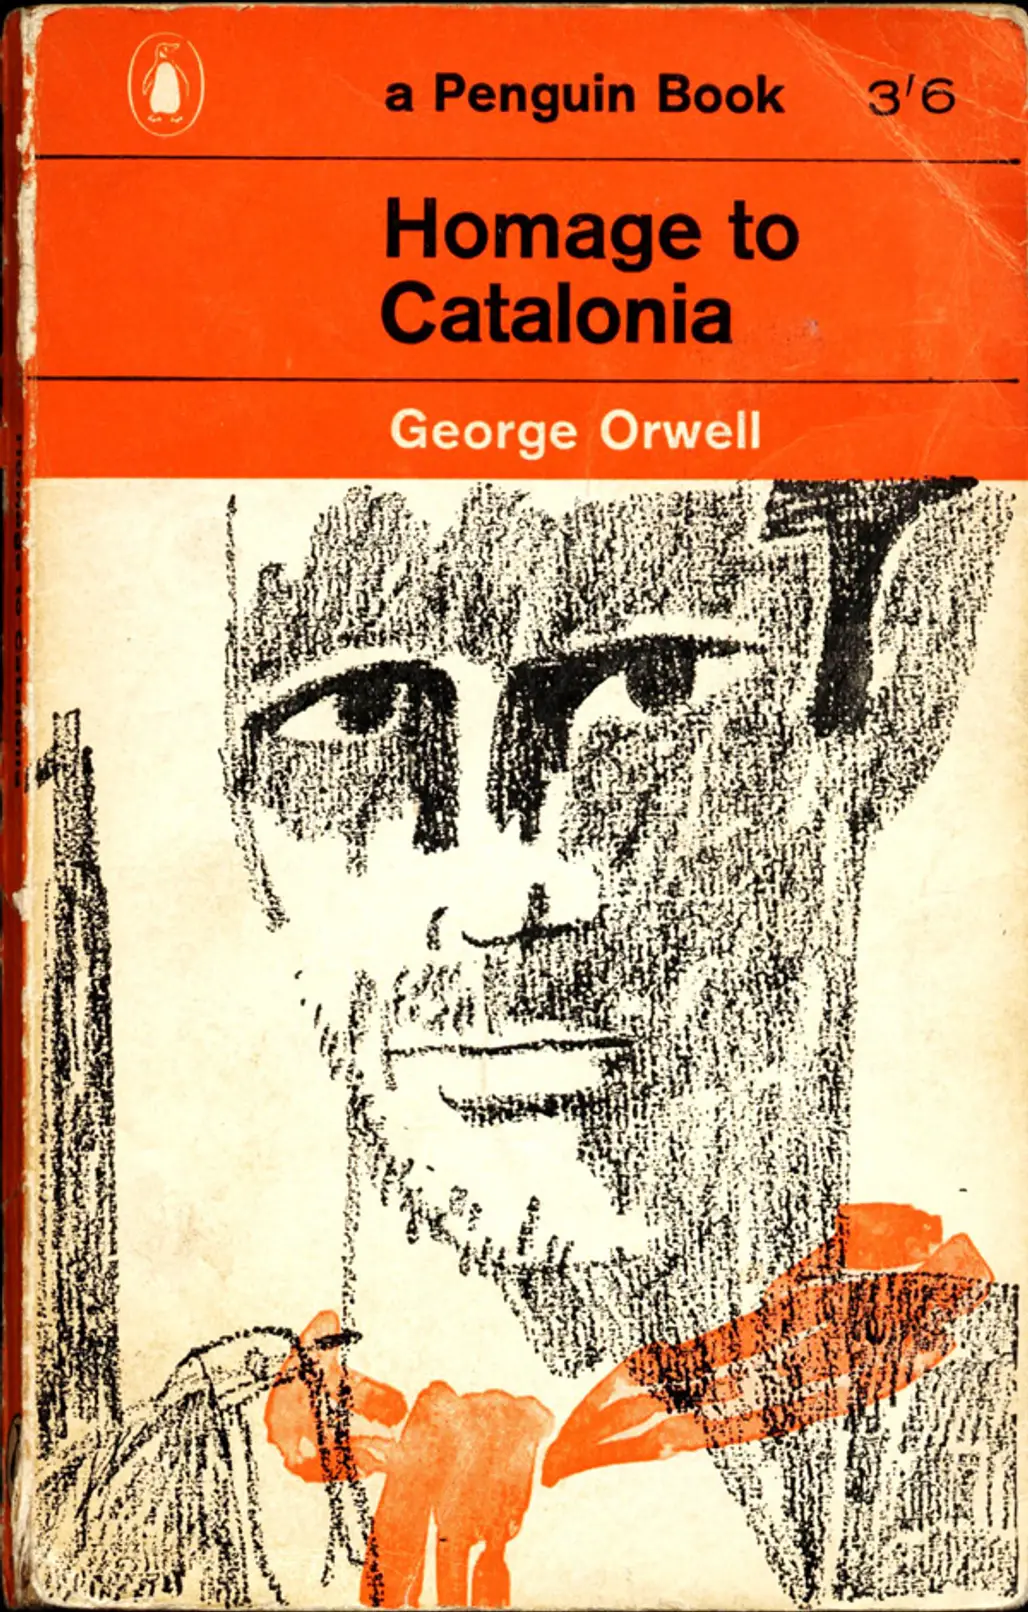 Homage to Catalonia: by George Orwell